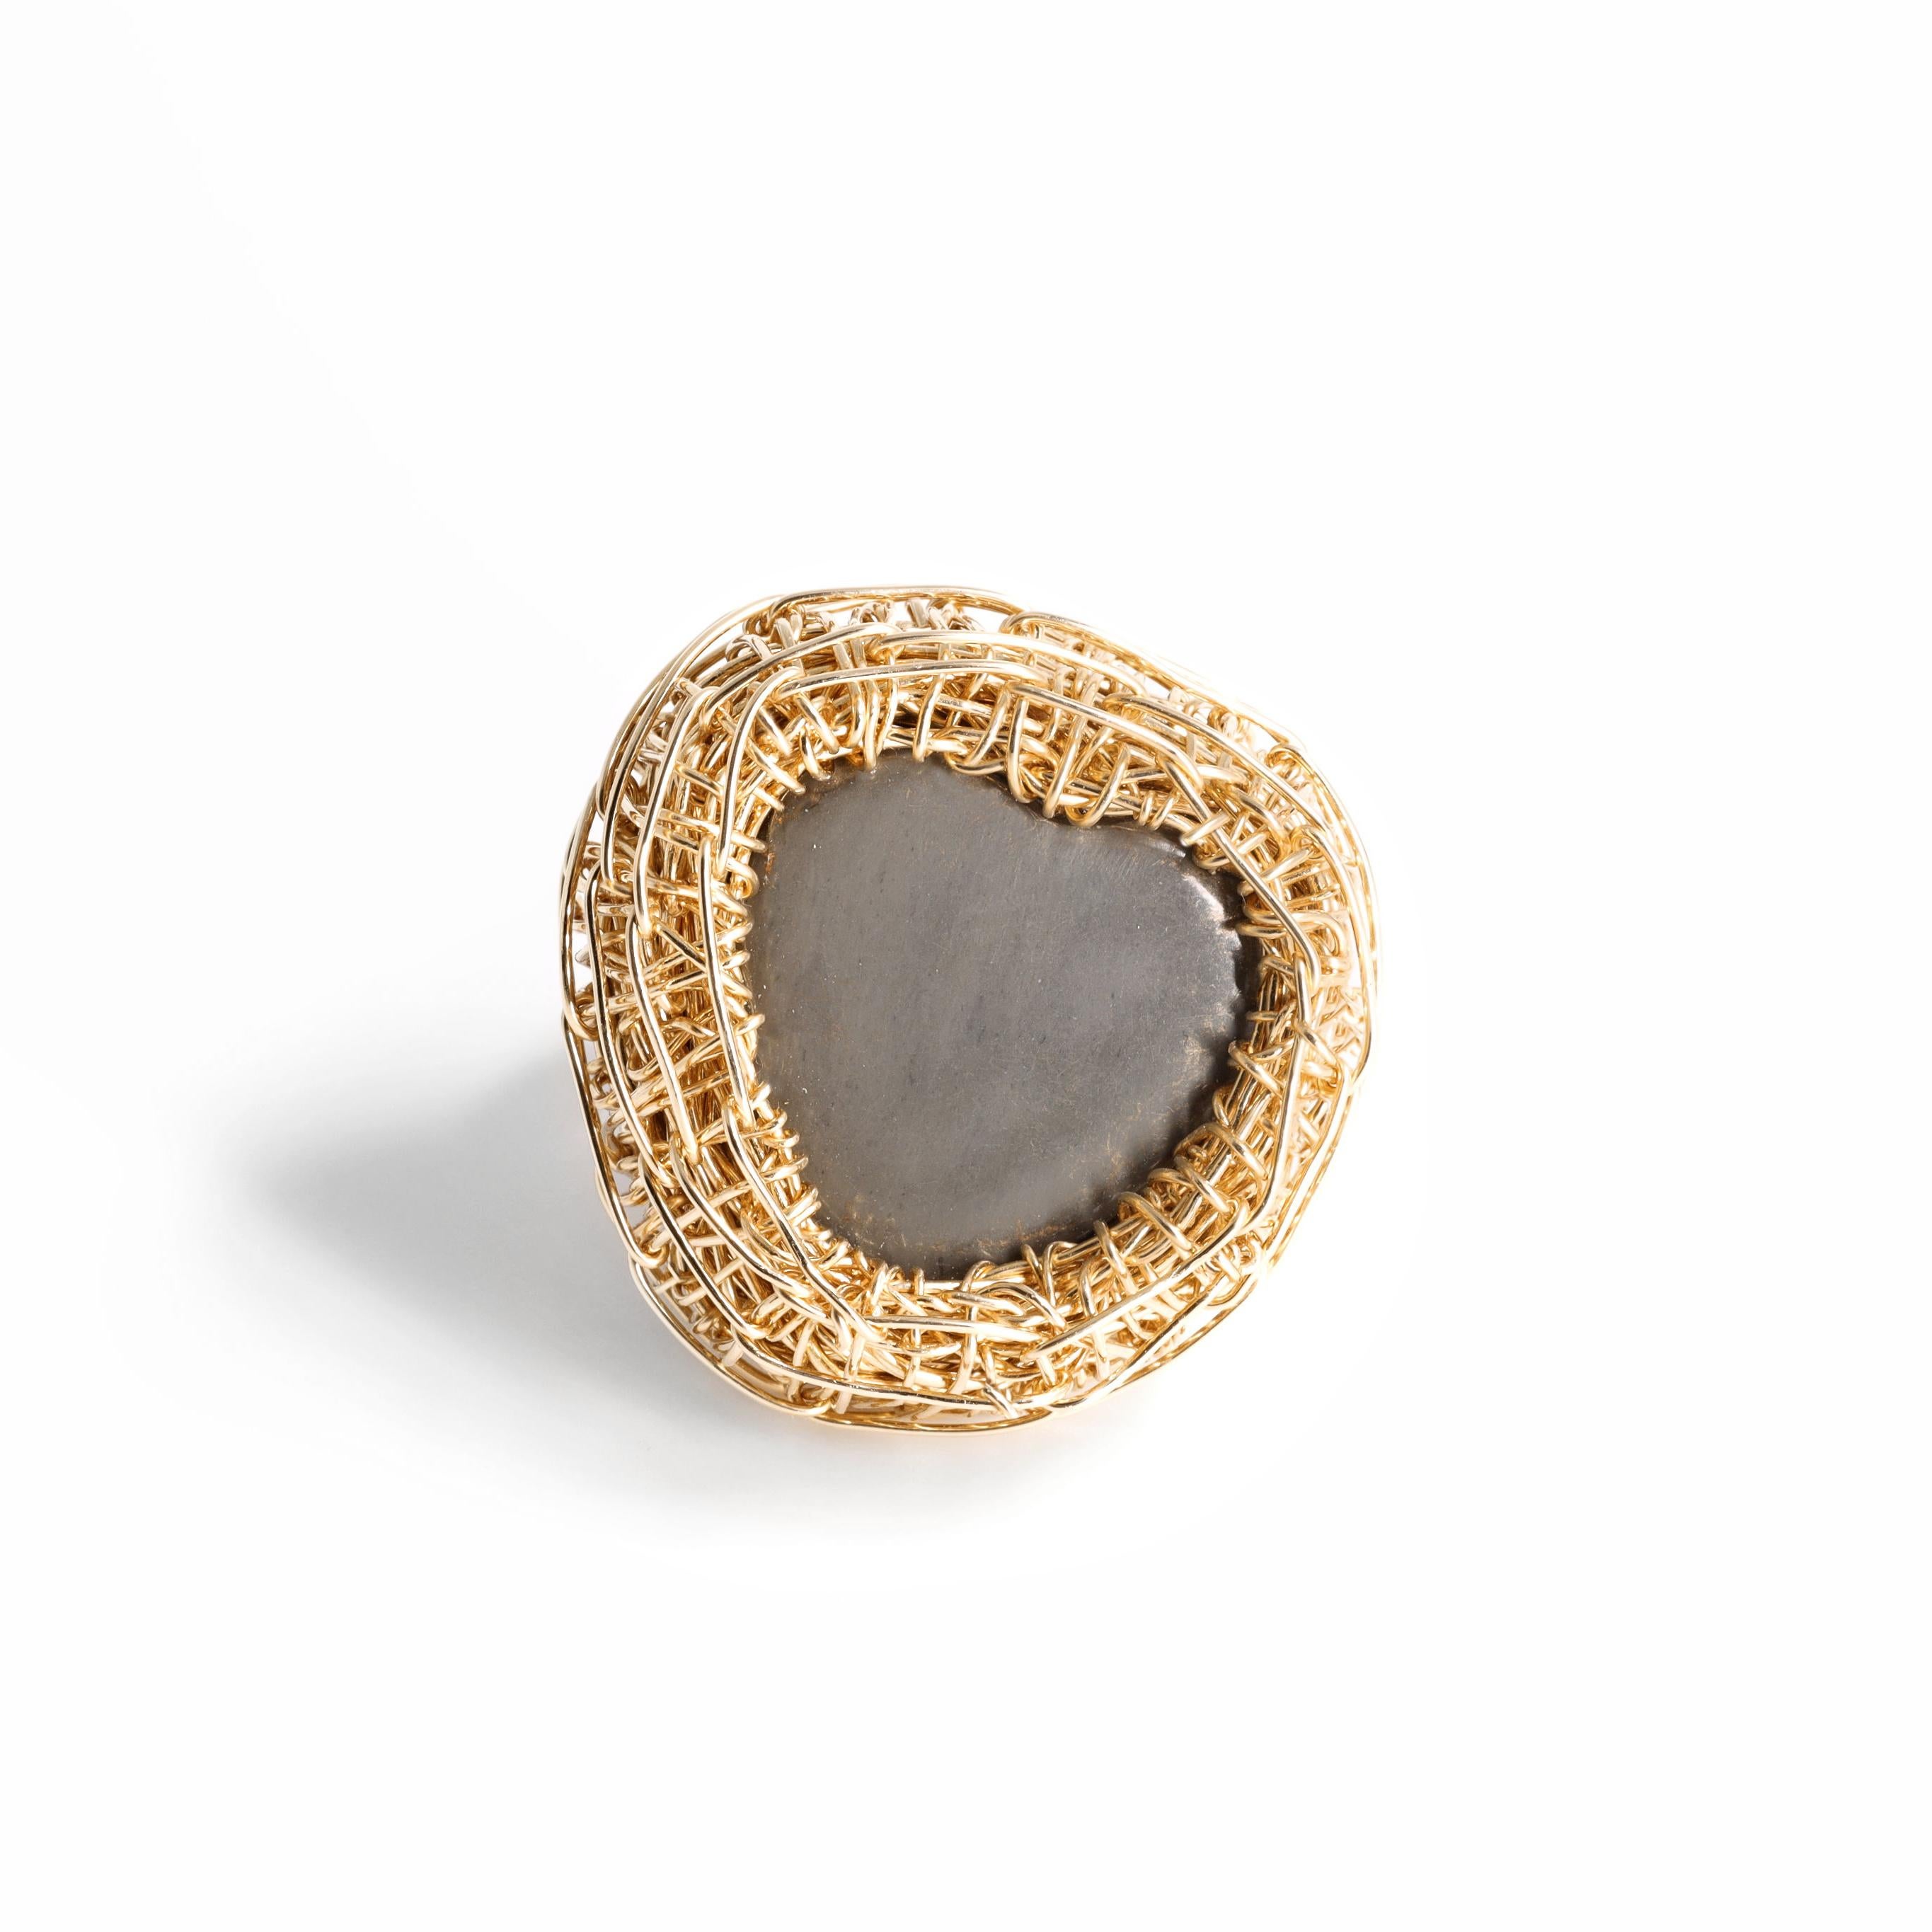 Heart Shaped Grey Stone Statement Cocktail Ring in 14 K Gold F. by the Artist For Sale 1